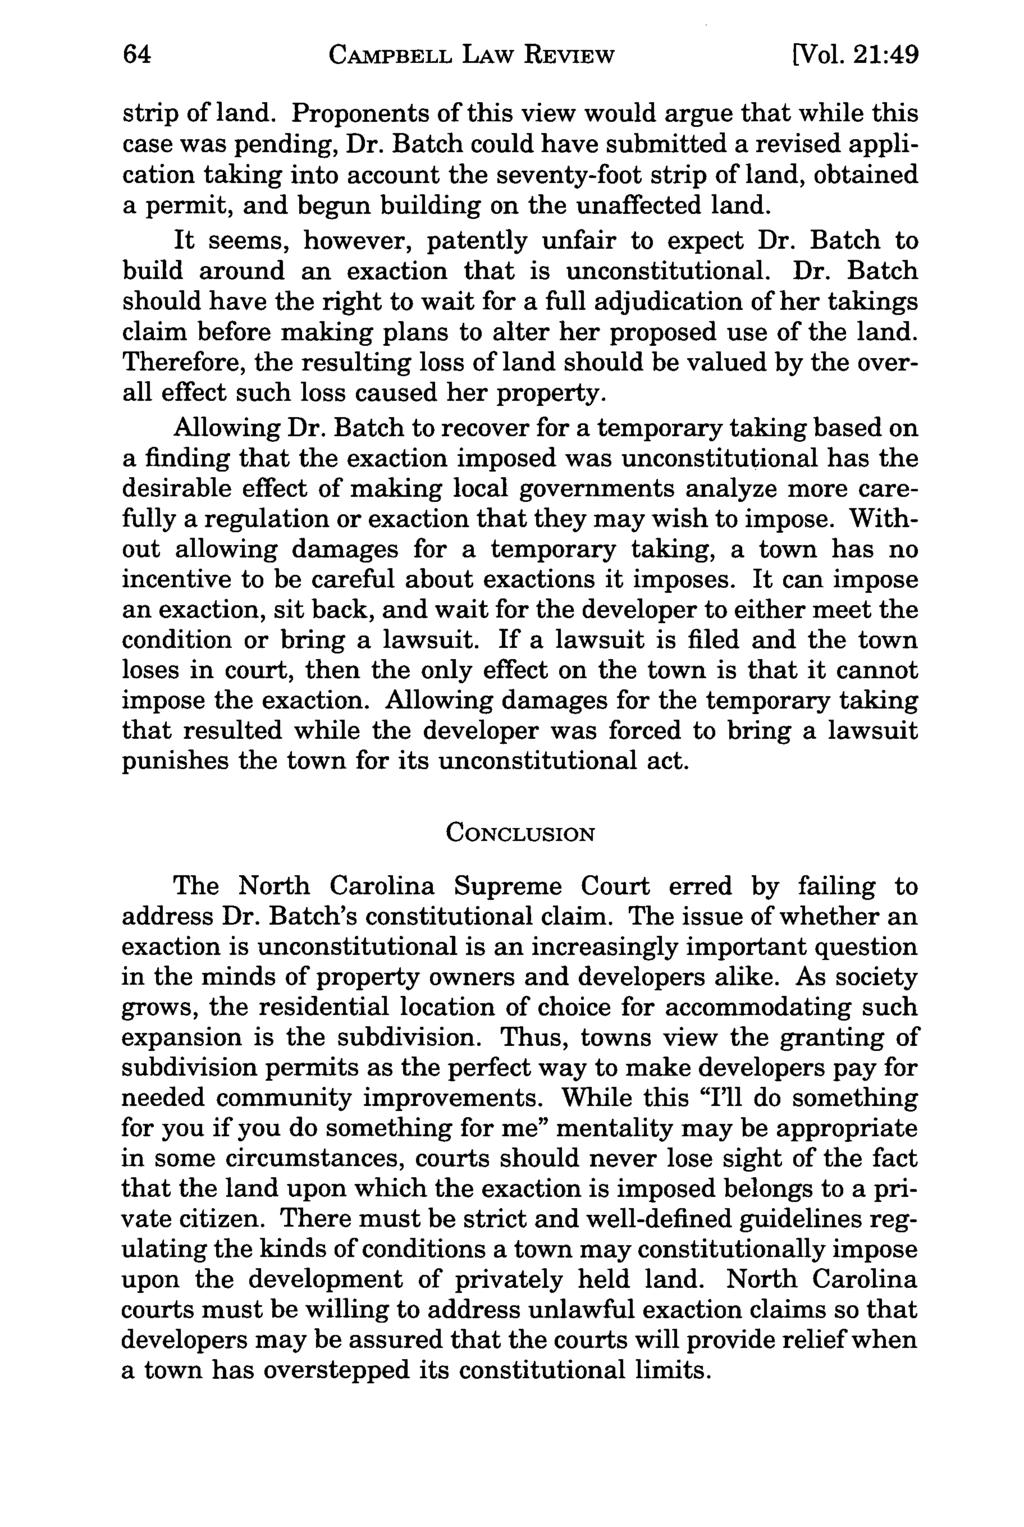 Campbell CAMPBELL Law Review, LAW Vol. REVIEW 21, Iss. 1 [1998], Art. 5 [Vol. 21:49 strip of land. Proponents of this view would argue that while this case was pending, Dr.